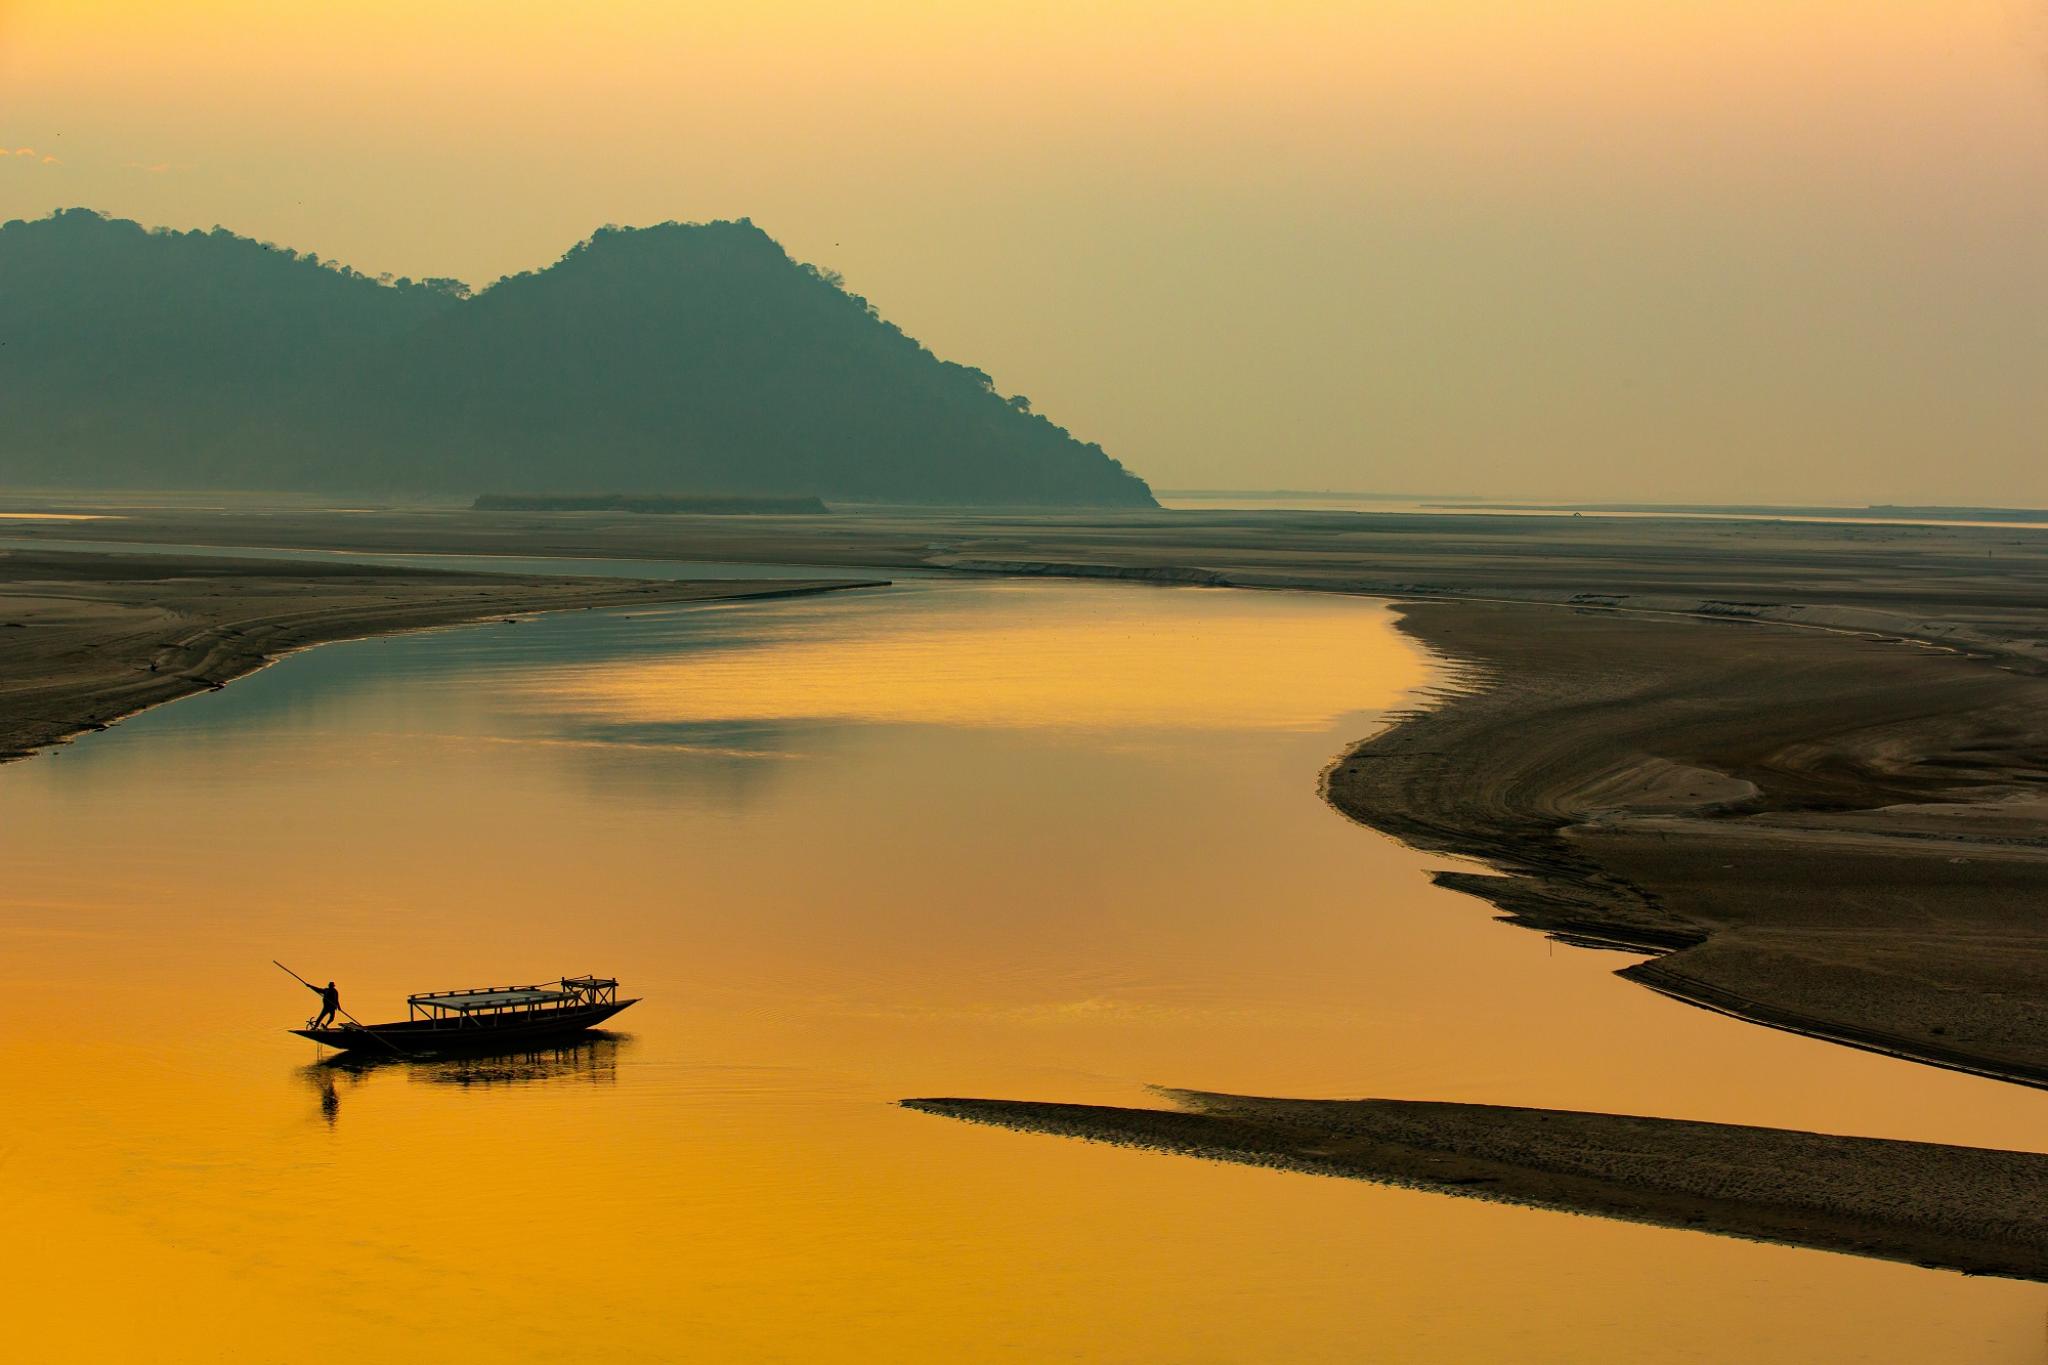 Sunset on the river,silhouette of a man rowing a boat, Mayong, Brahmaputra river, Assam, India; Photo By Jimmy Kamballur